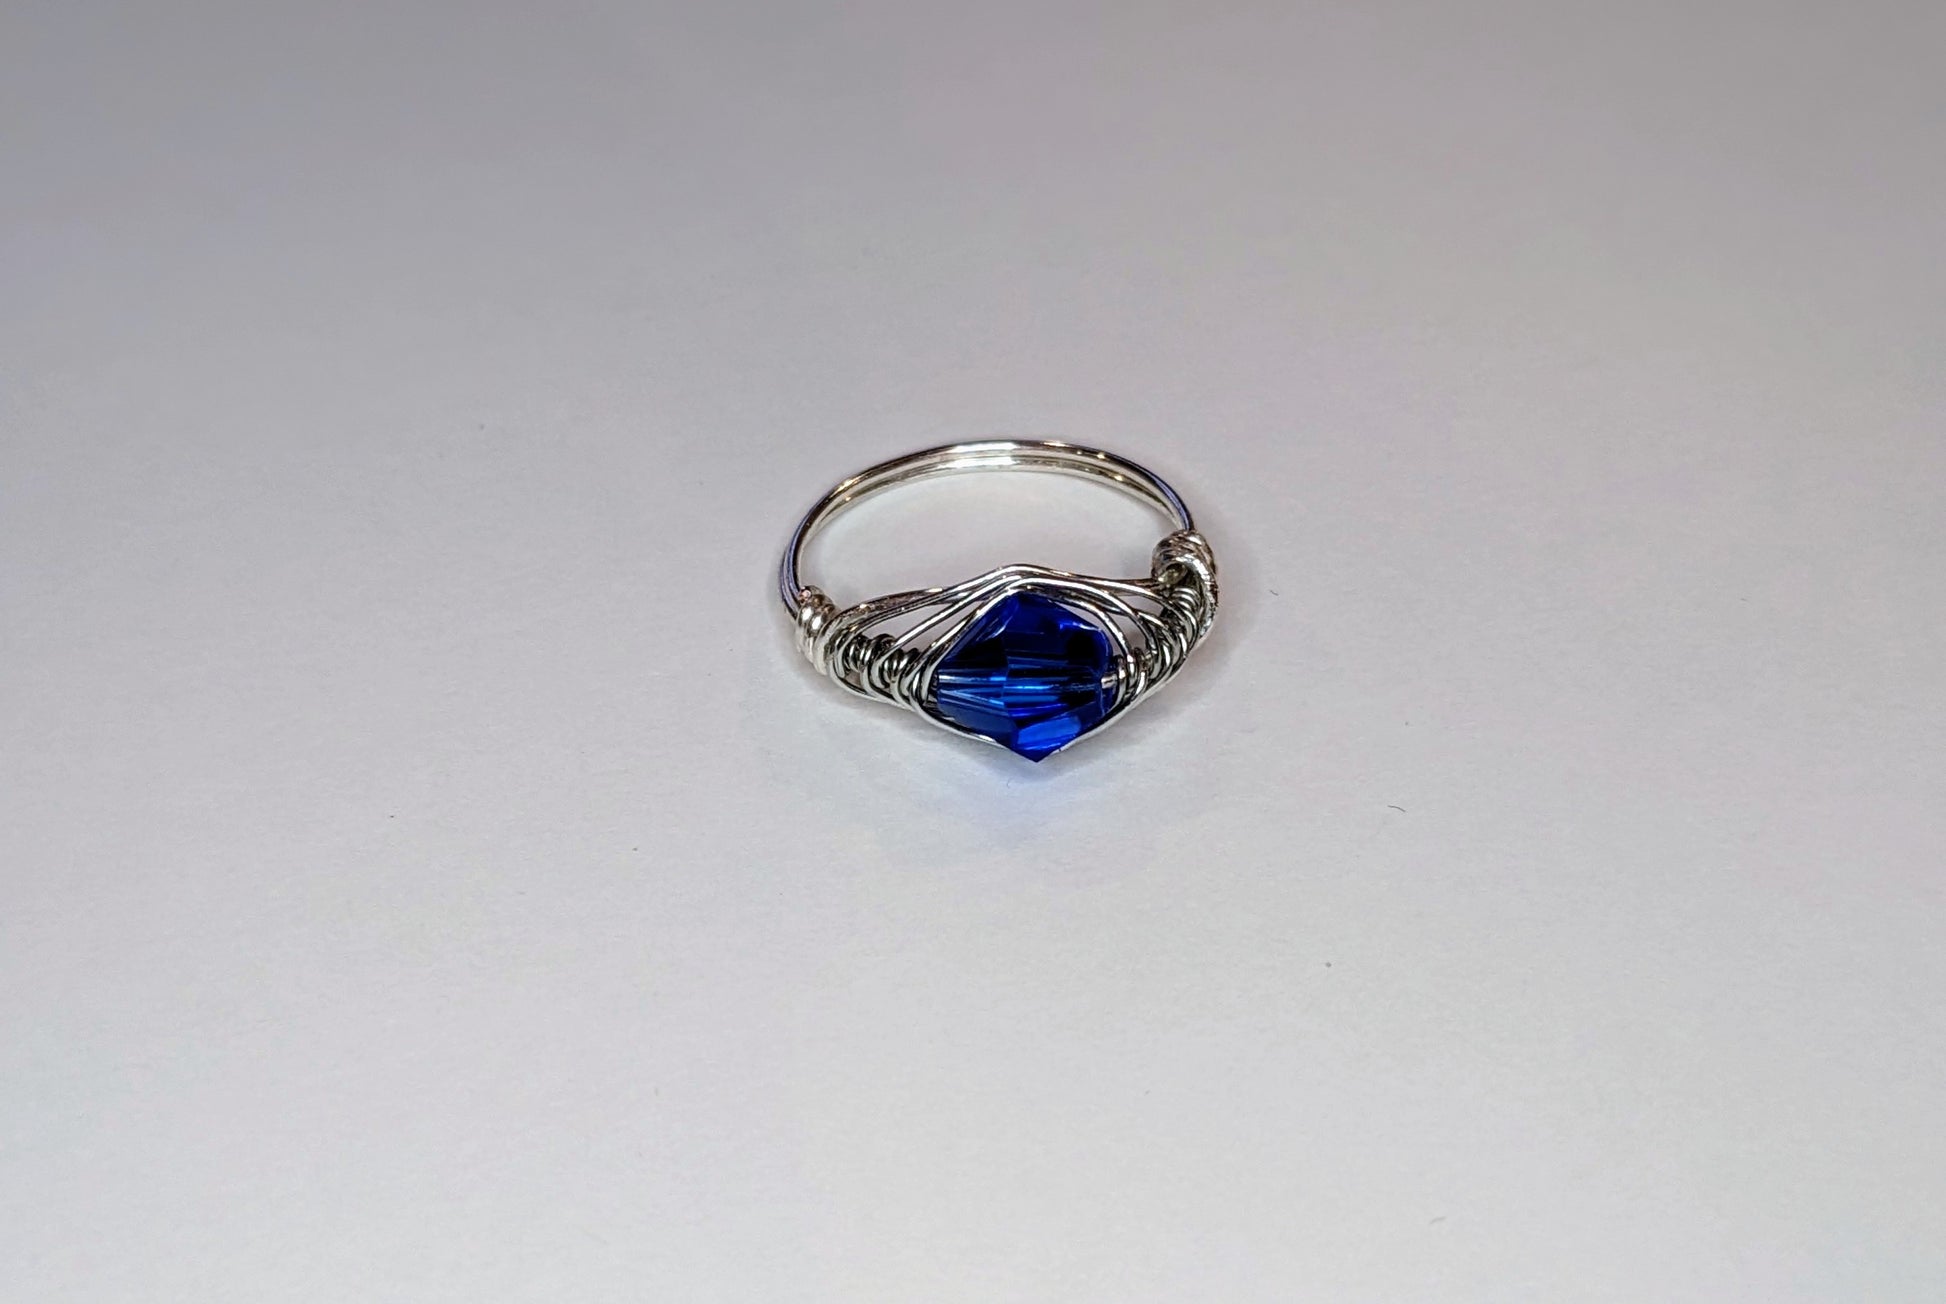 Silver wire wrapped ring with a blue stone on a white background 